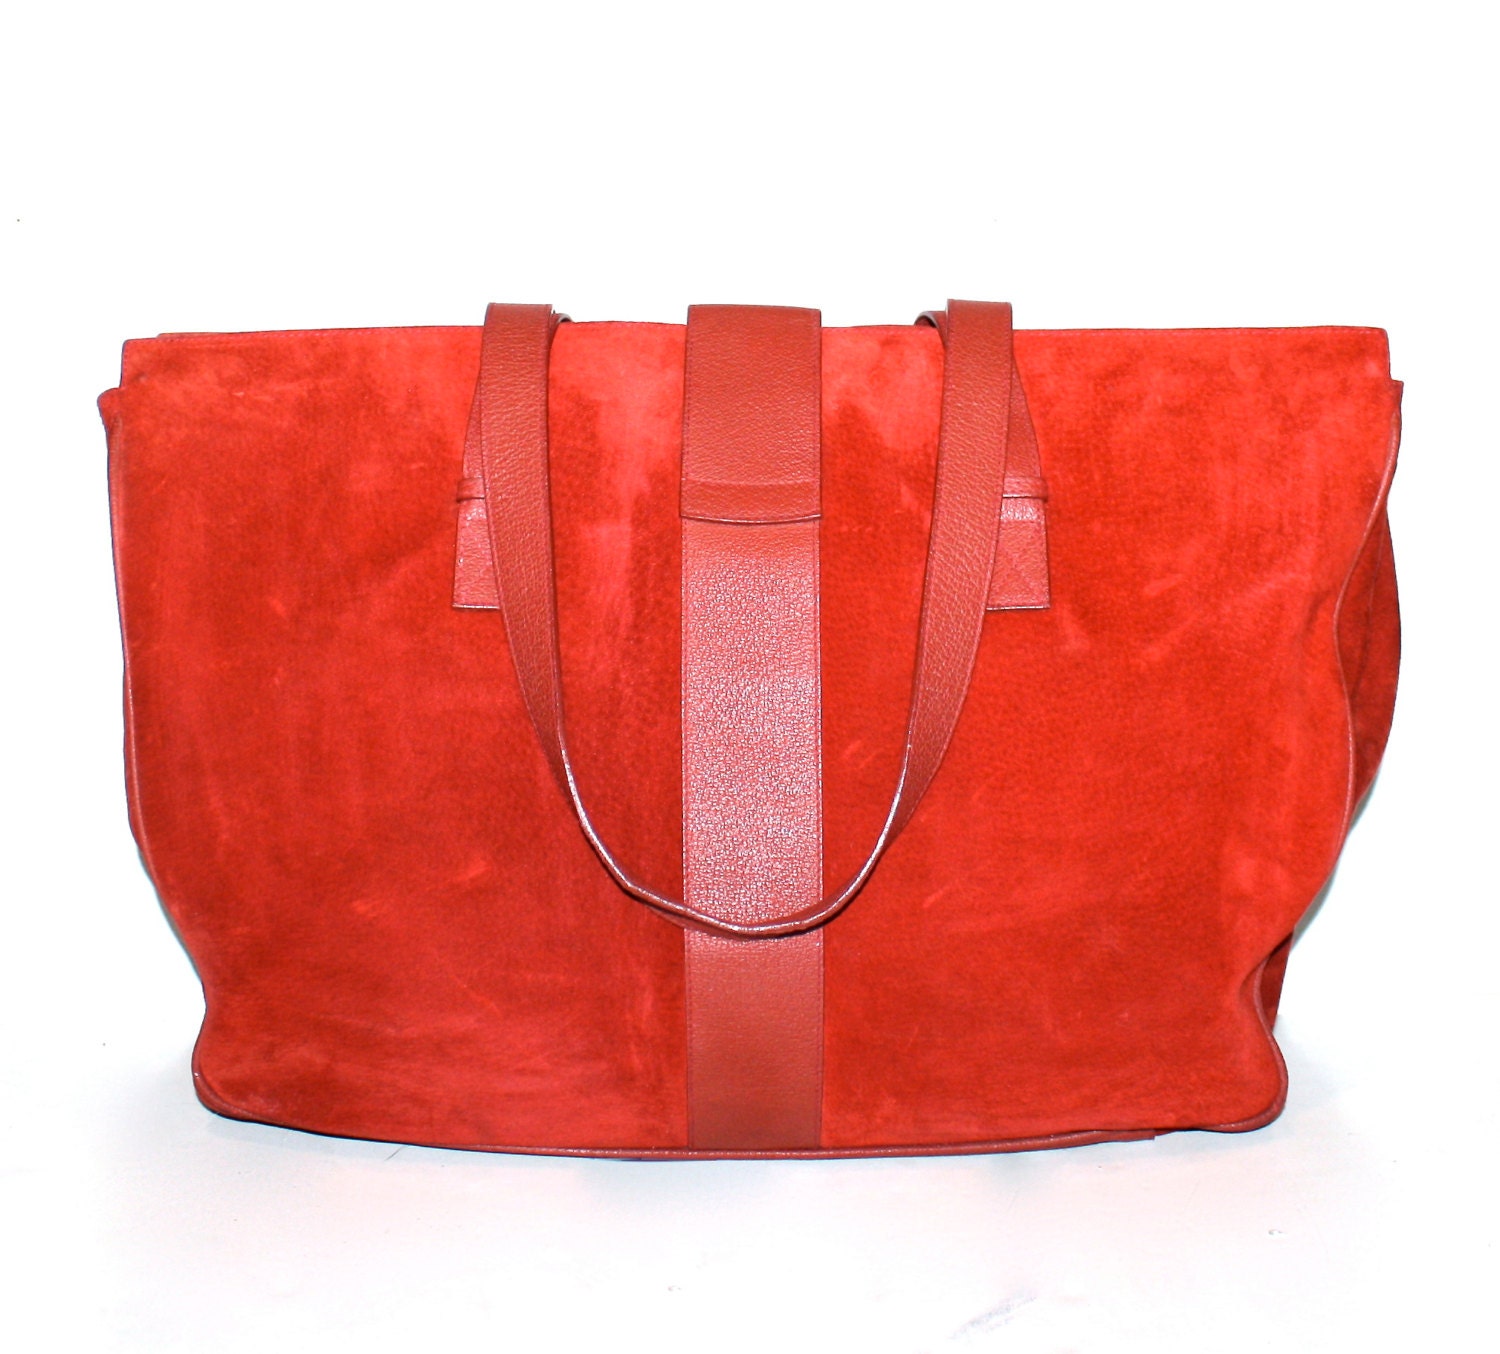 GUCCI Vintage Handbag Red Suede Leather Large Carry All Tote - Etsy UK